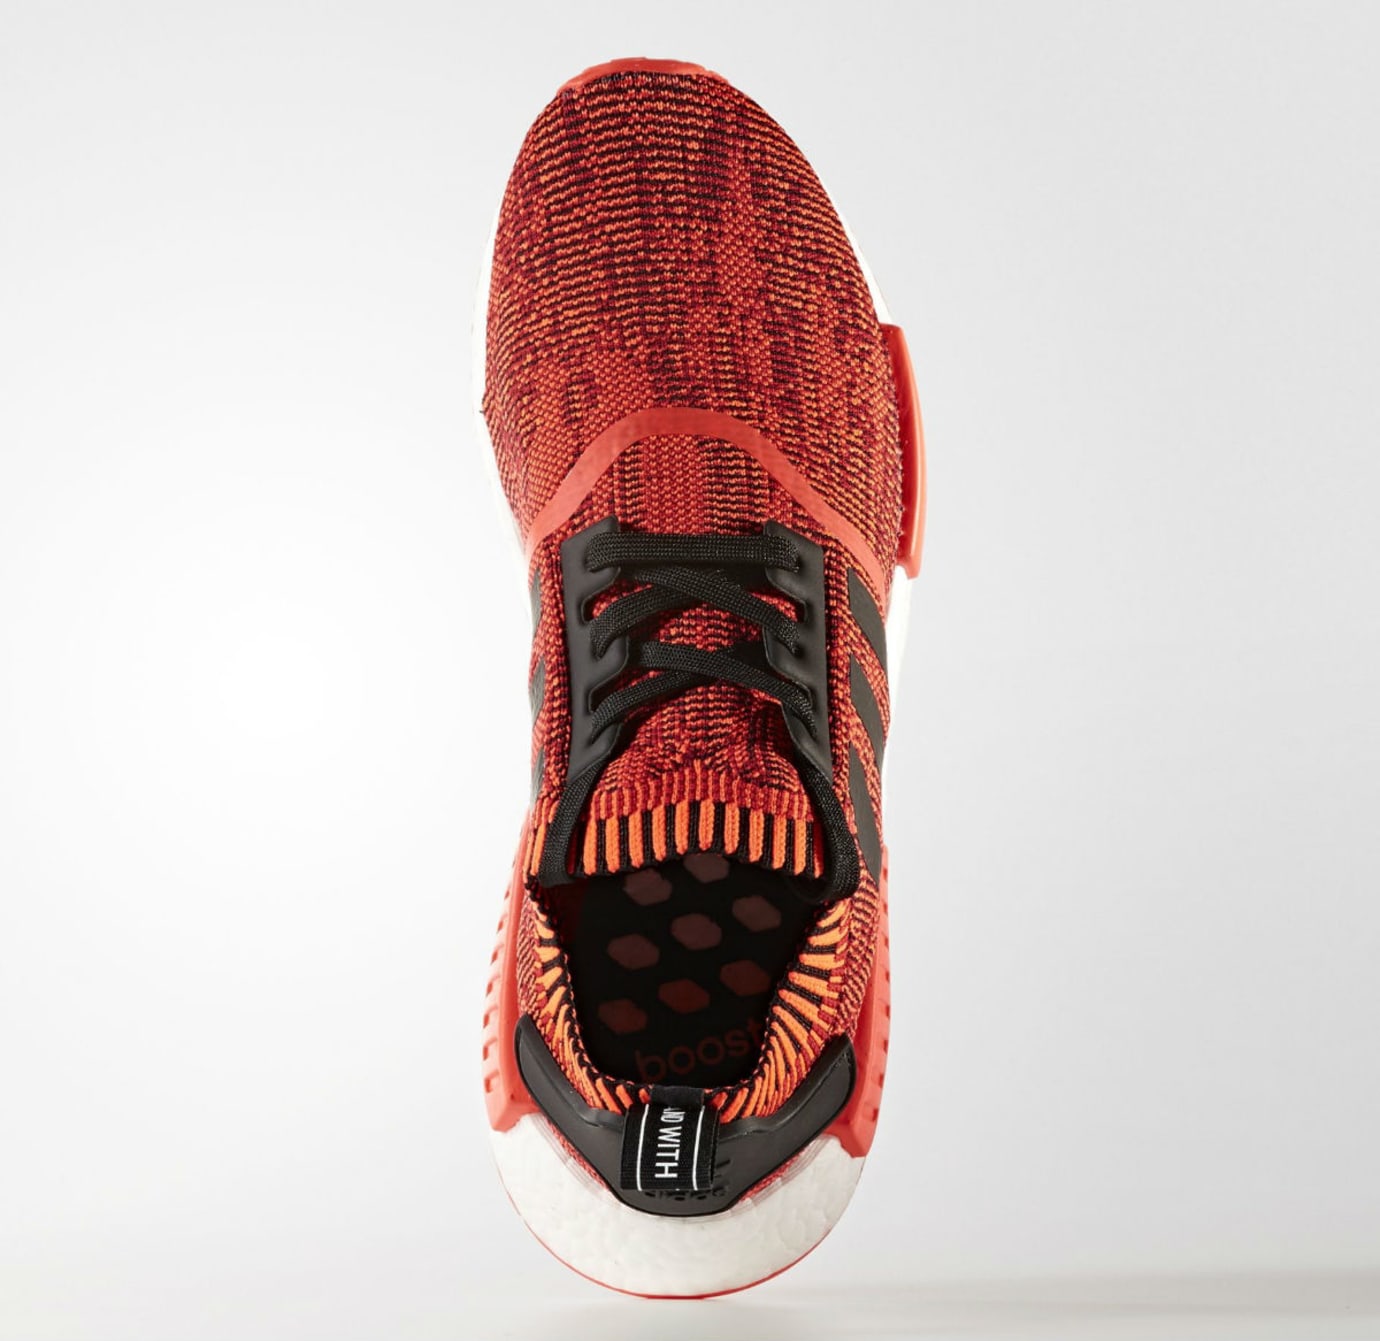 Adidas NMD Red Apple 2.0 Release Date CQ1865 | Sole Collector